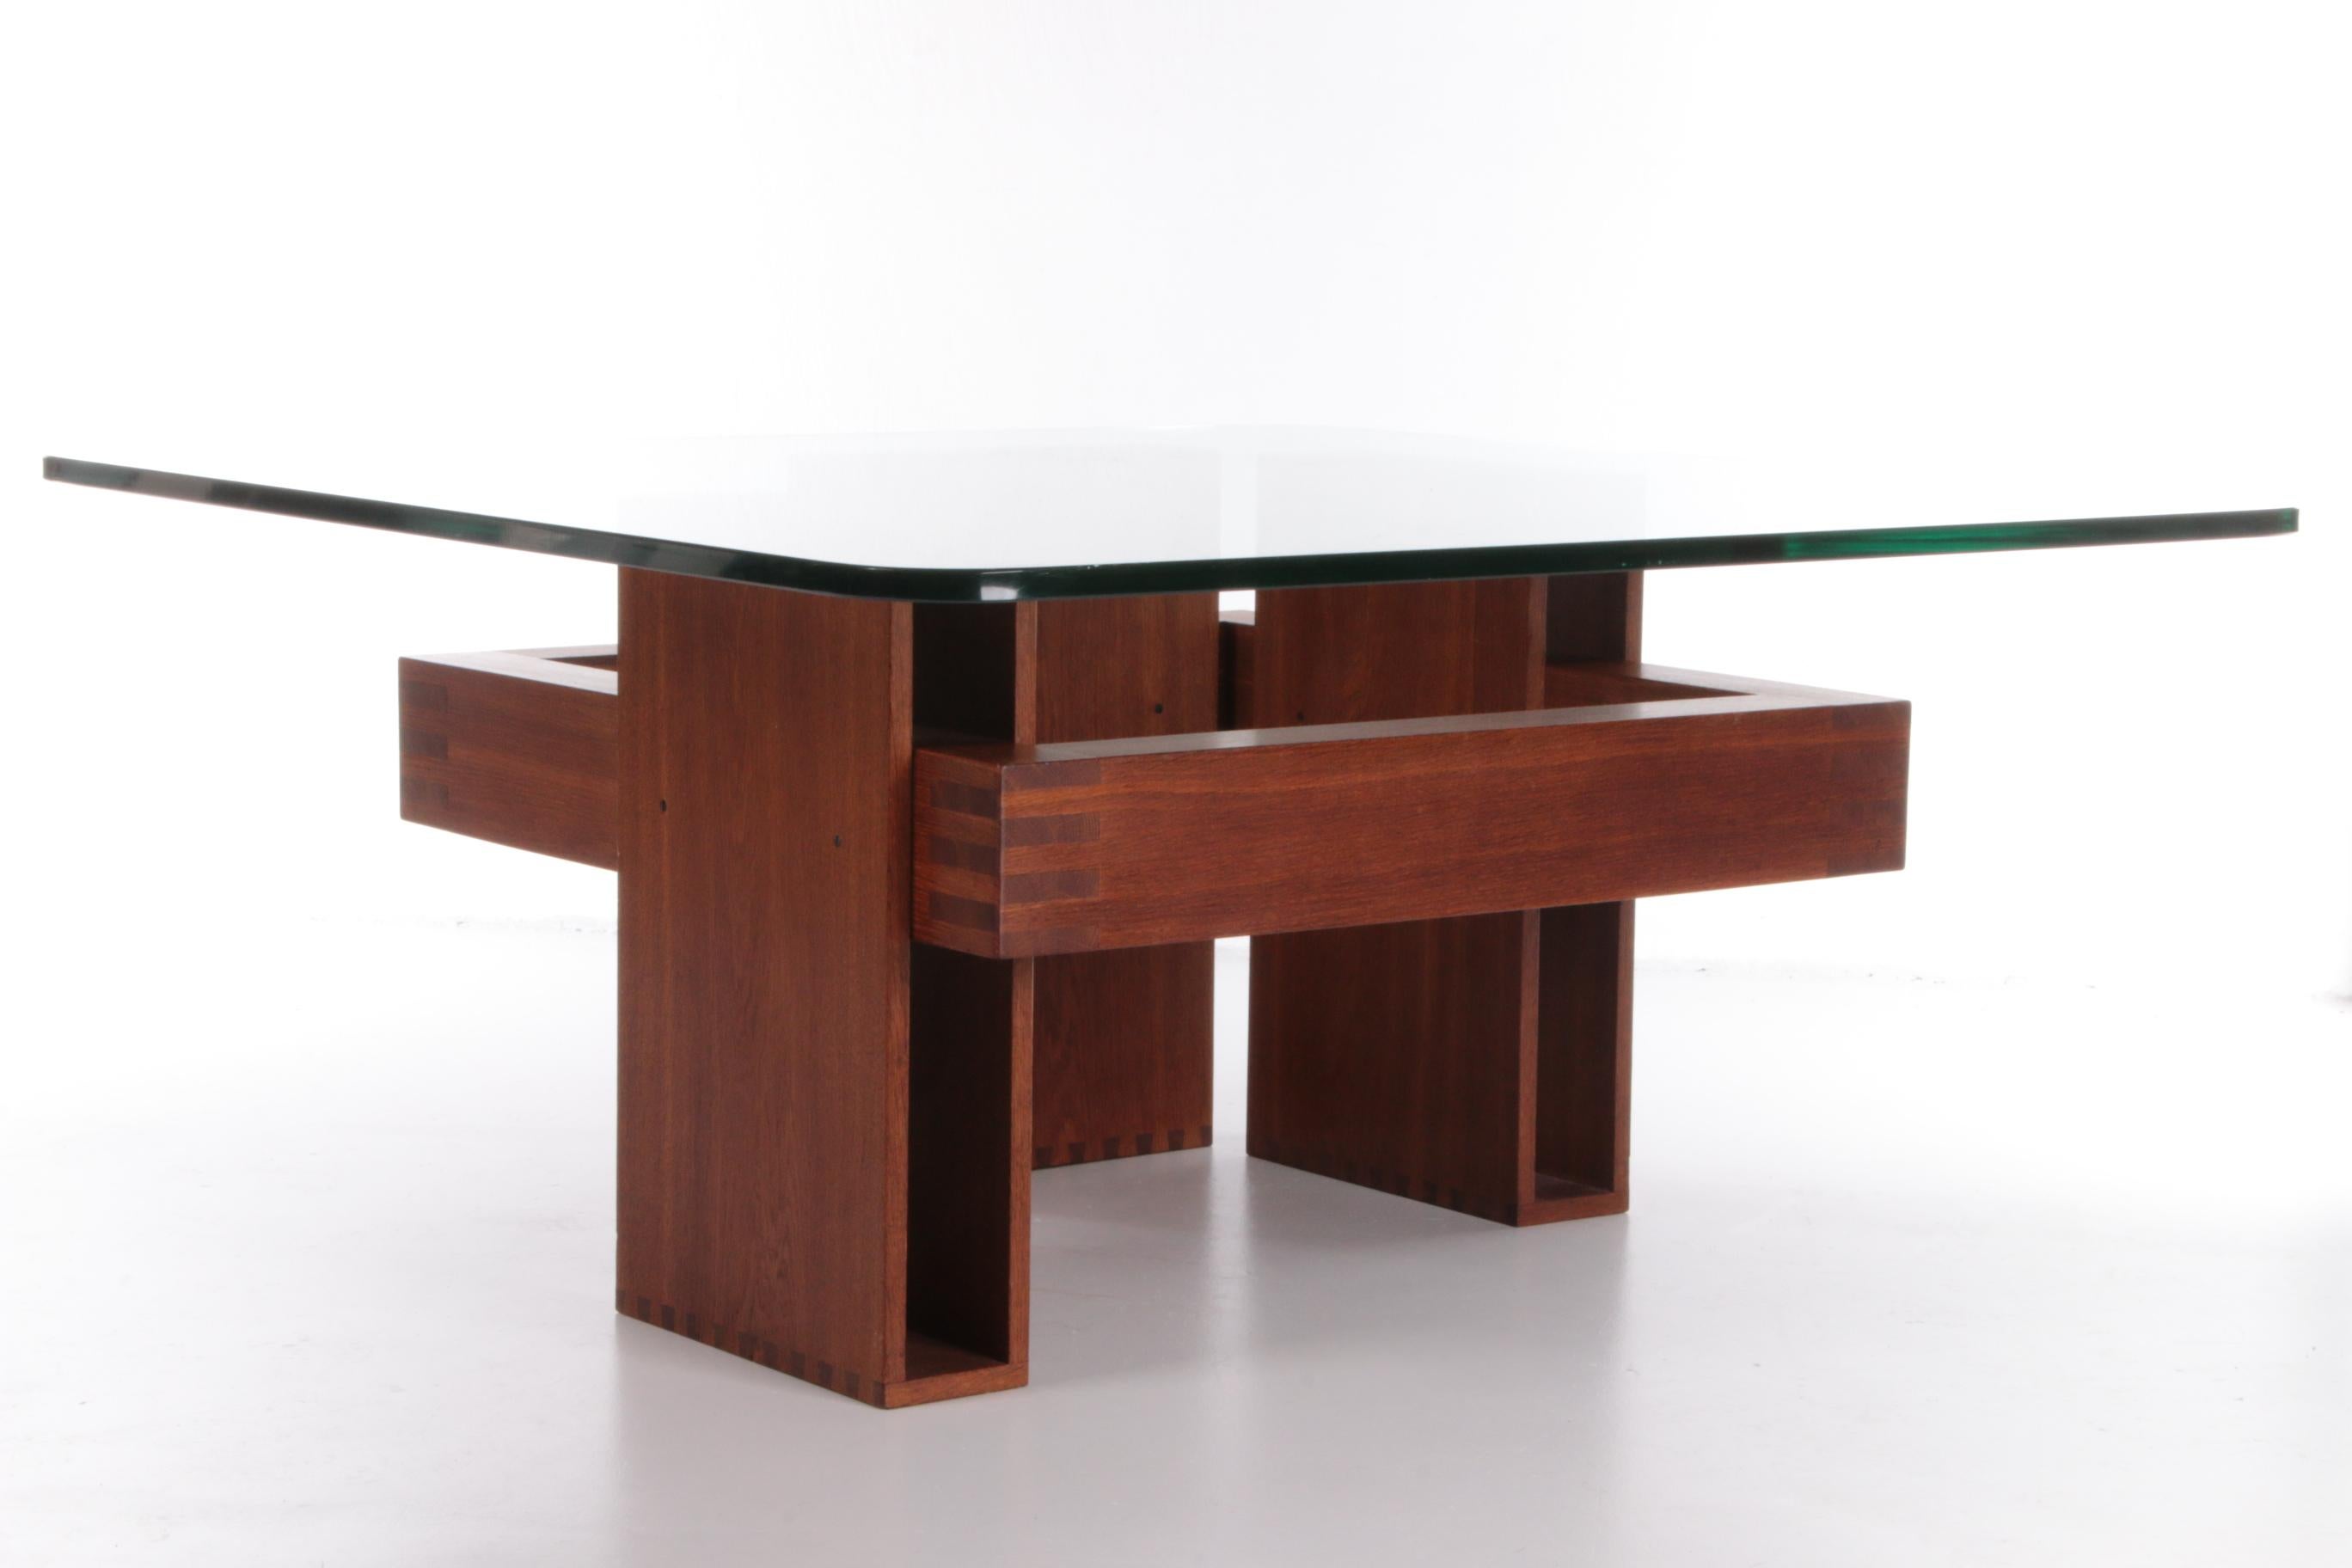 Late 20th Century French Brutalist Design Coffee Table of Teak with Glass Top, 1970 For Sale